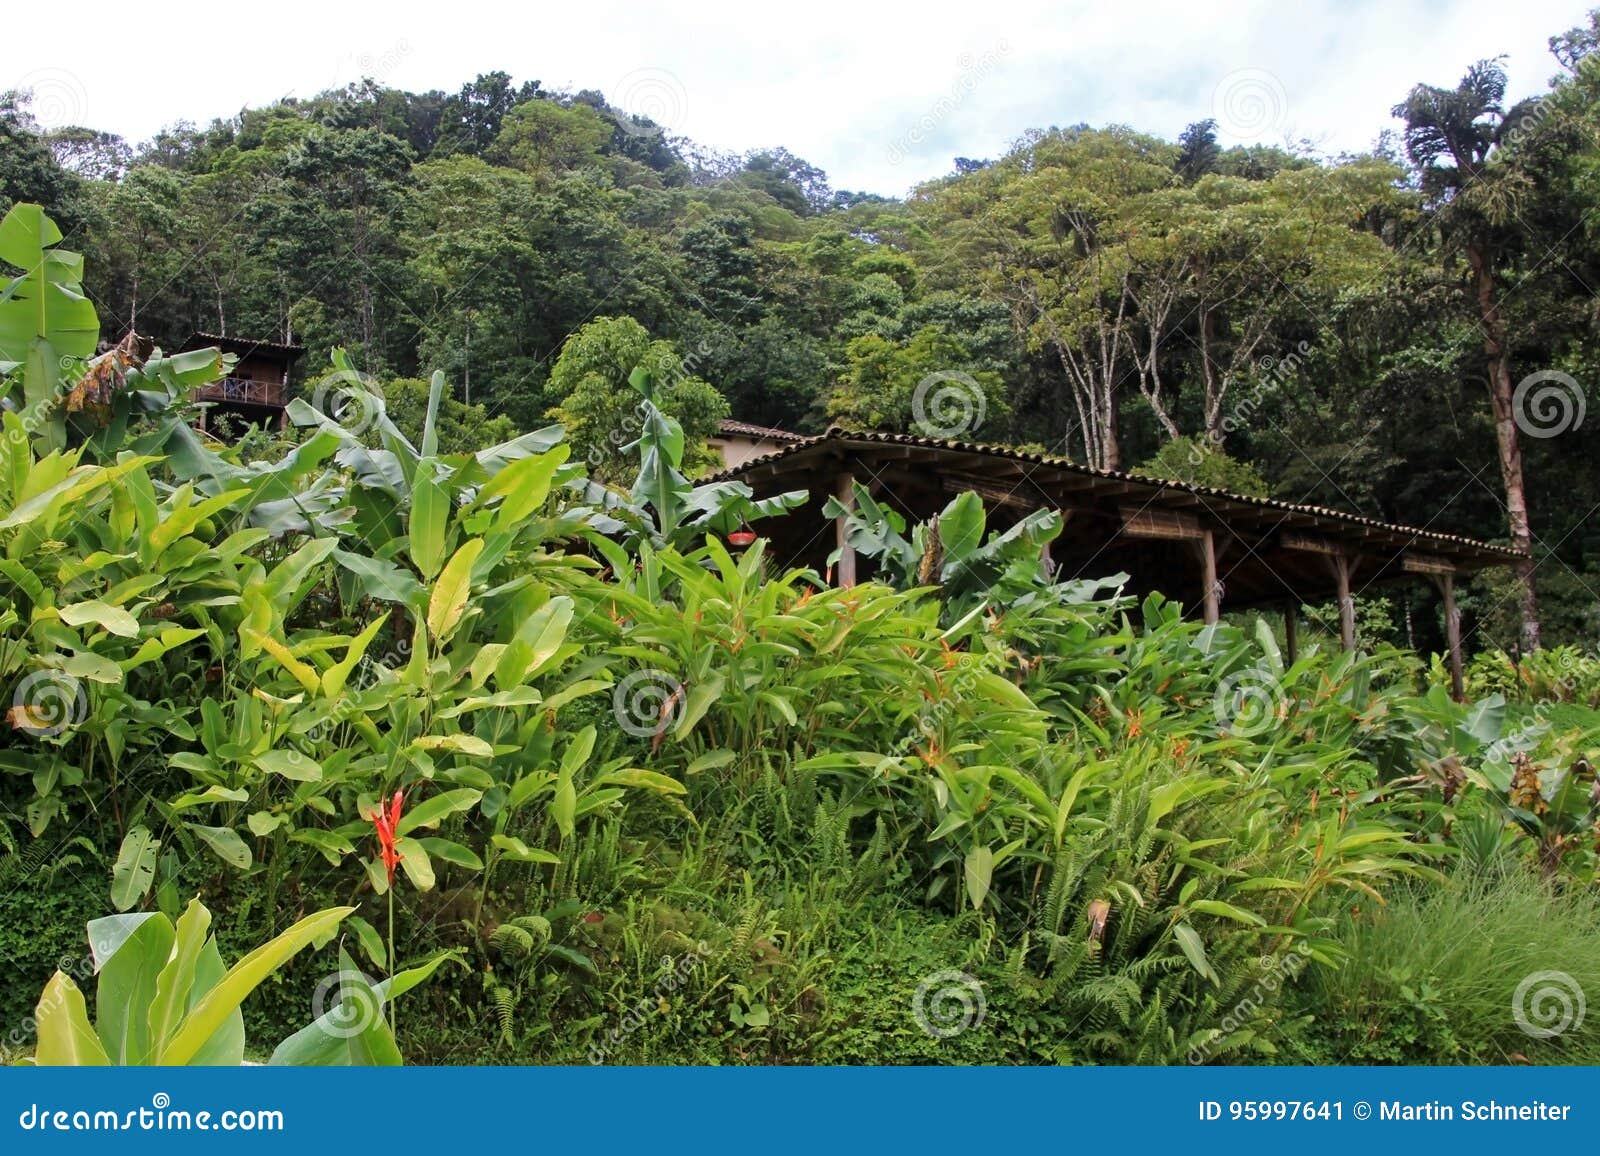 landscape and coffee farm in the highlands of matagalpa, nicaragua